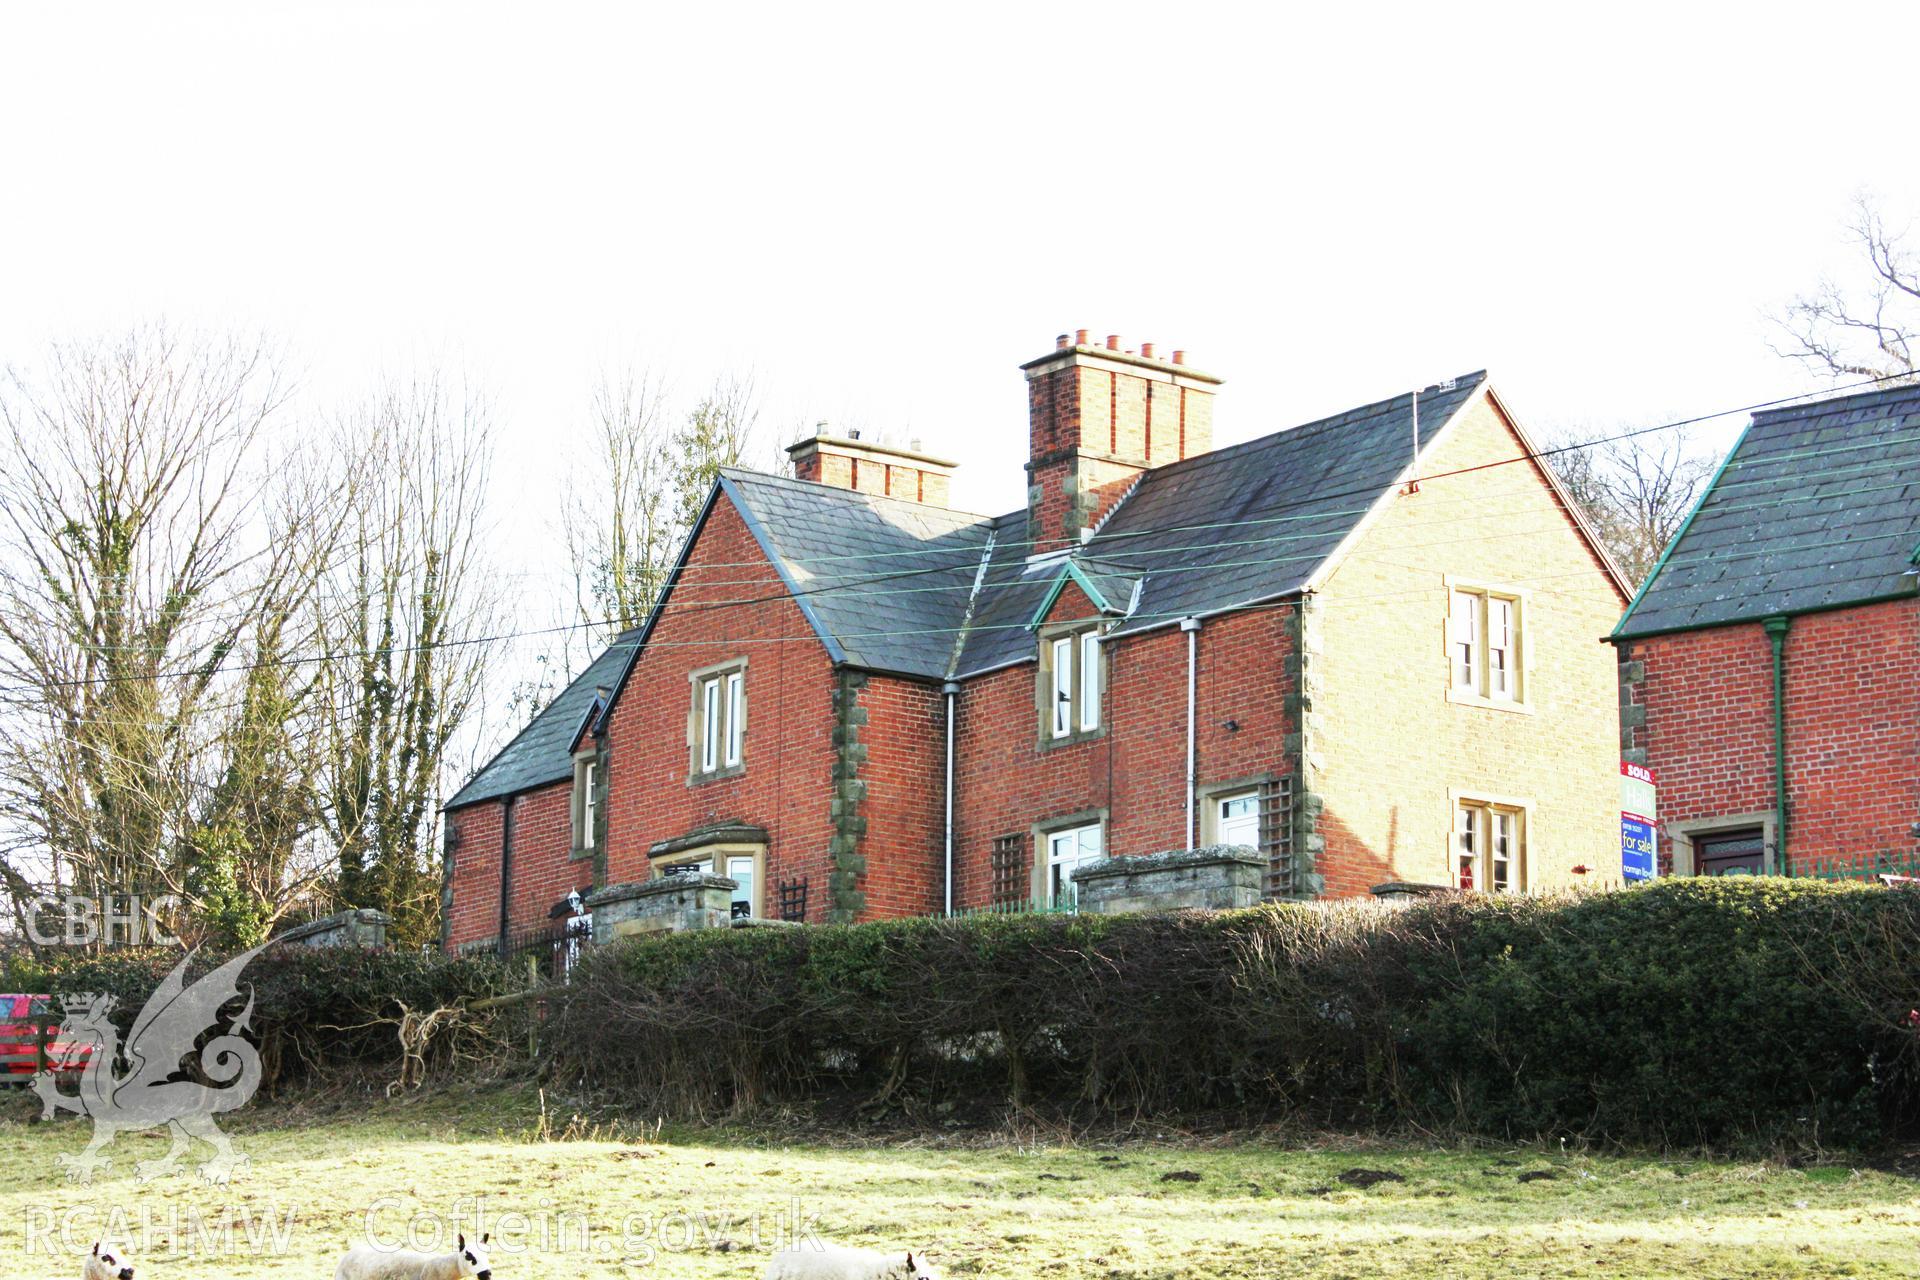 Colour photograph showing red brick exterior of Pentre Cottages, Leighton. Photographed during survey conducted by Geoff Ward on 11th July 2009.